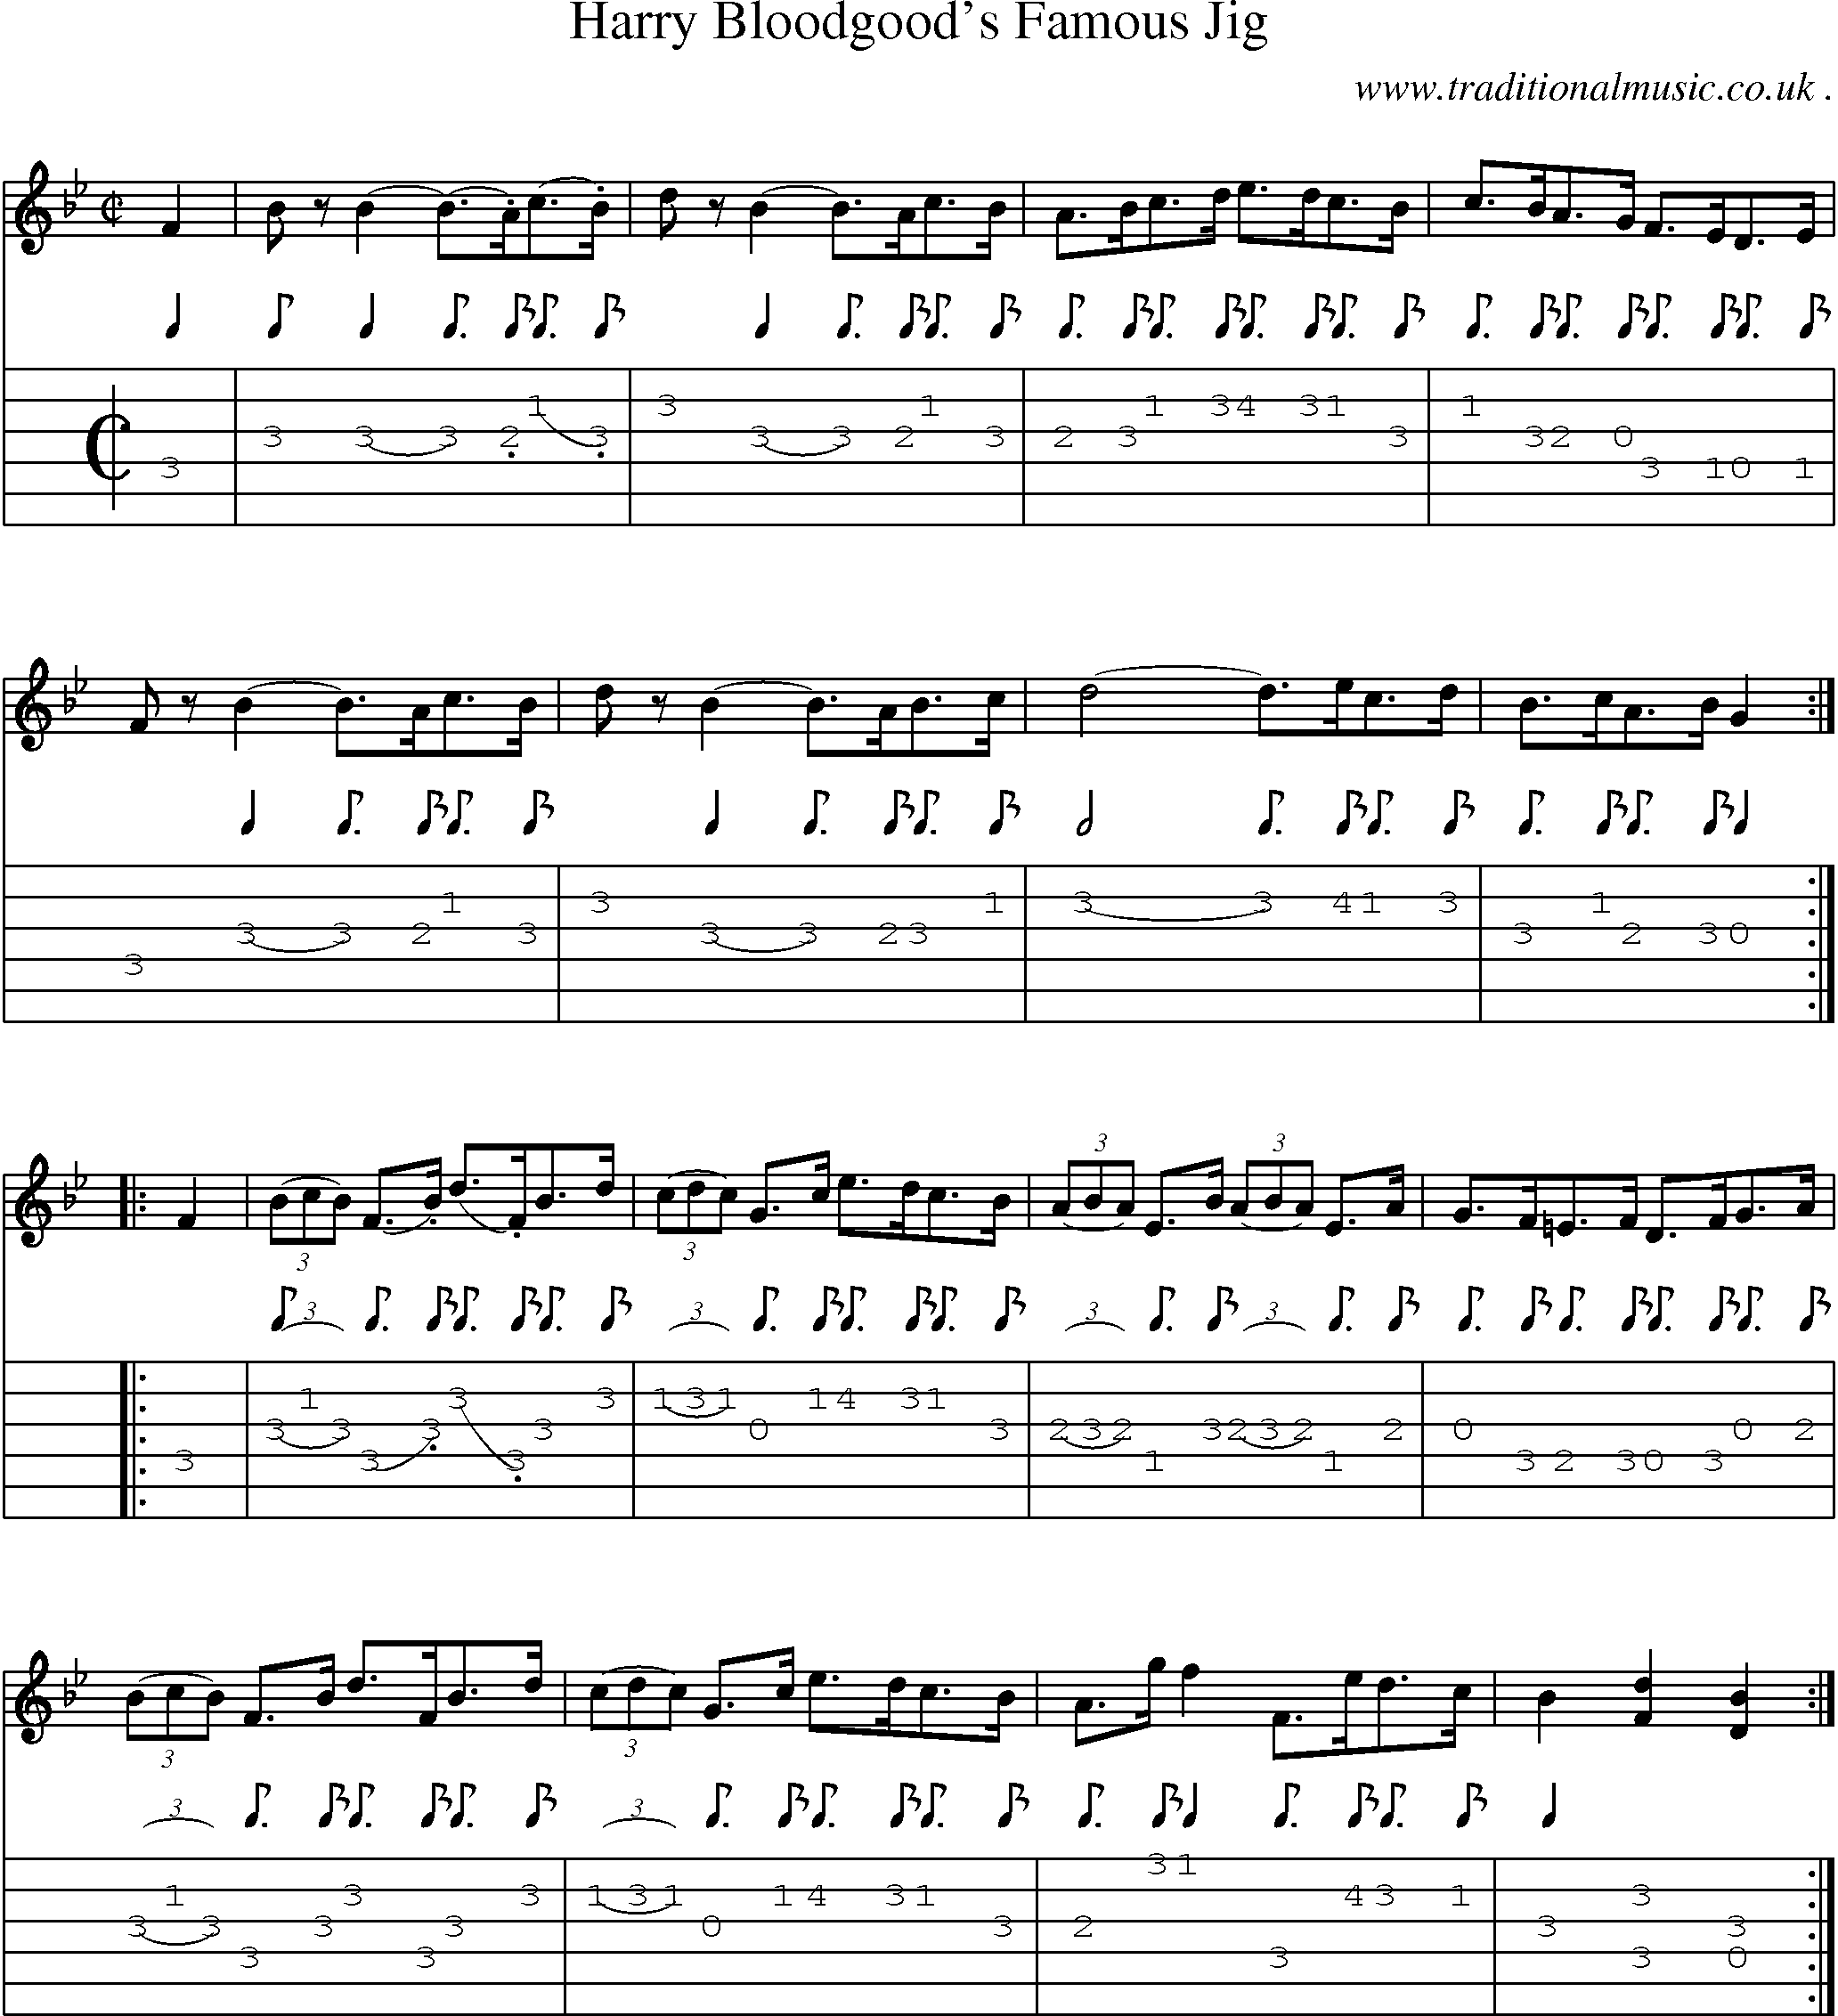 Sheet-Music and Guitar Tabs for Harry Bloodgoods Famous Jig